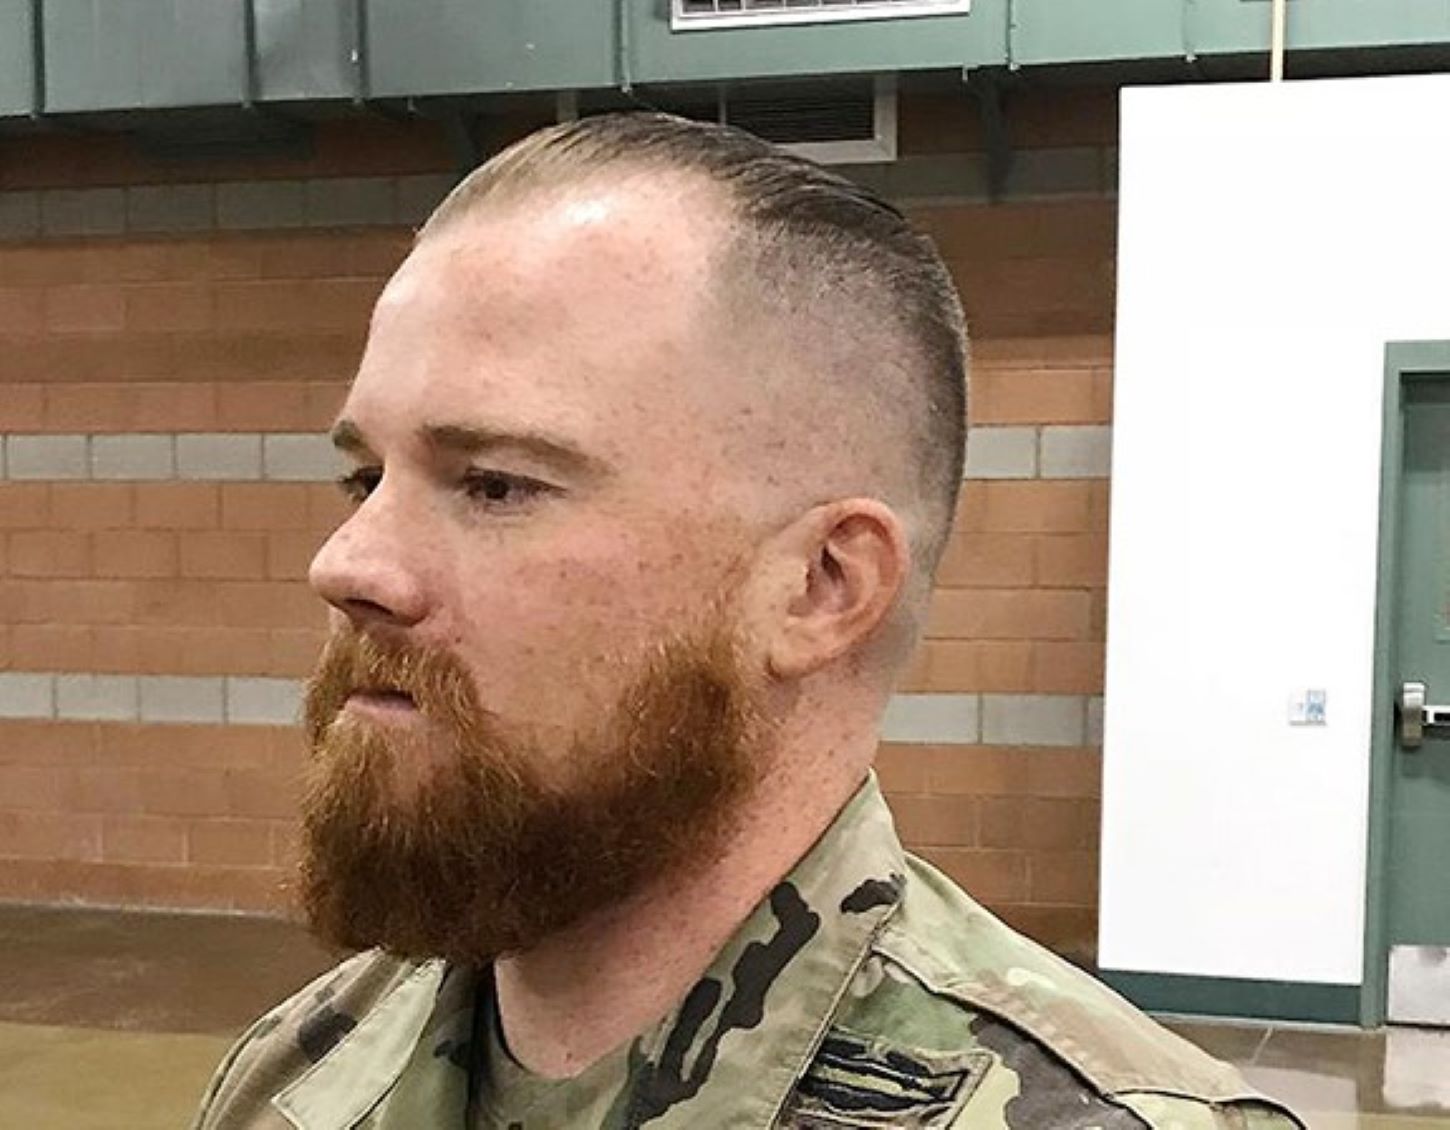 Military’s top adviser: beards don’t help lethality, they hurt unit identity